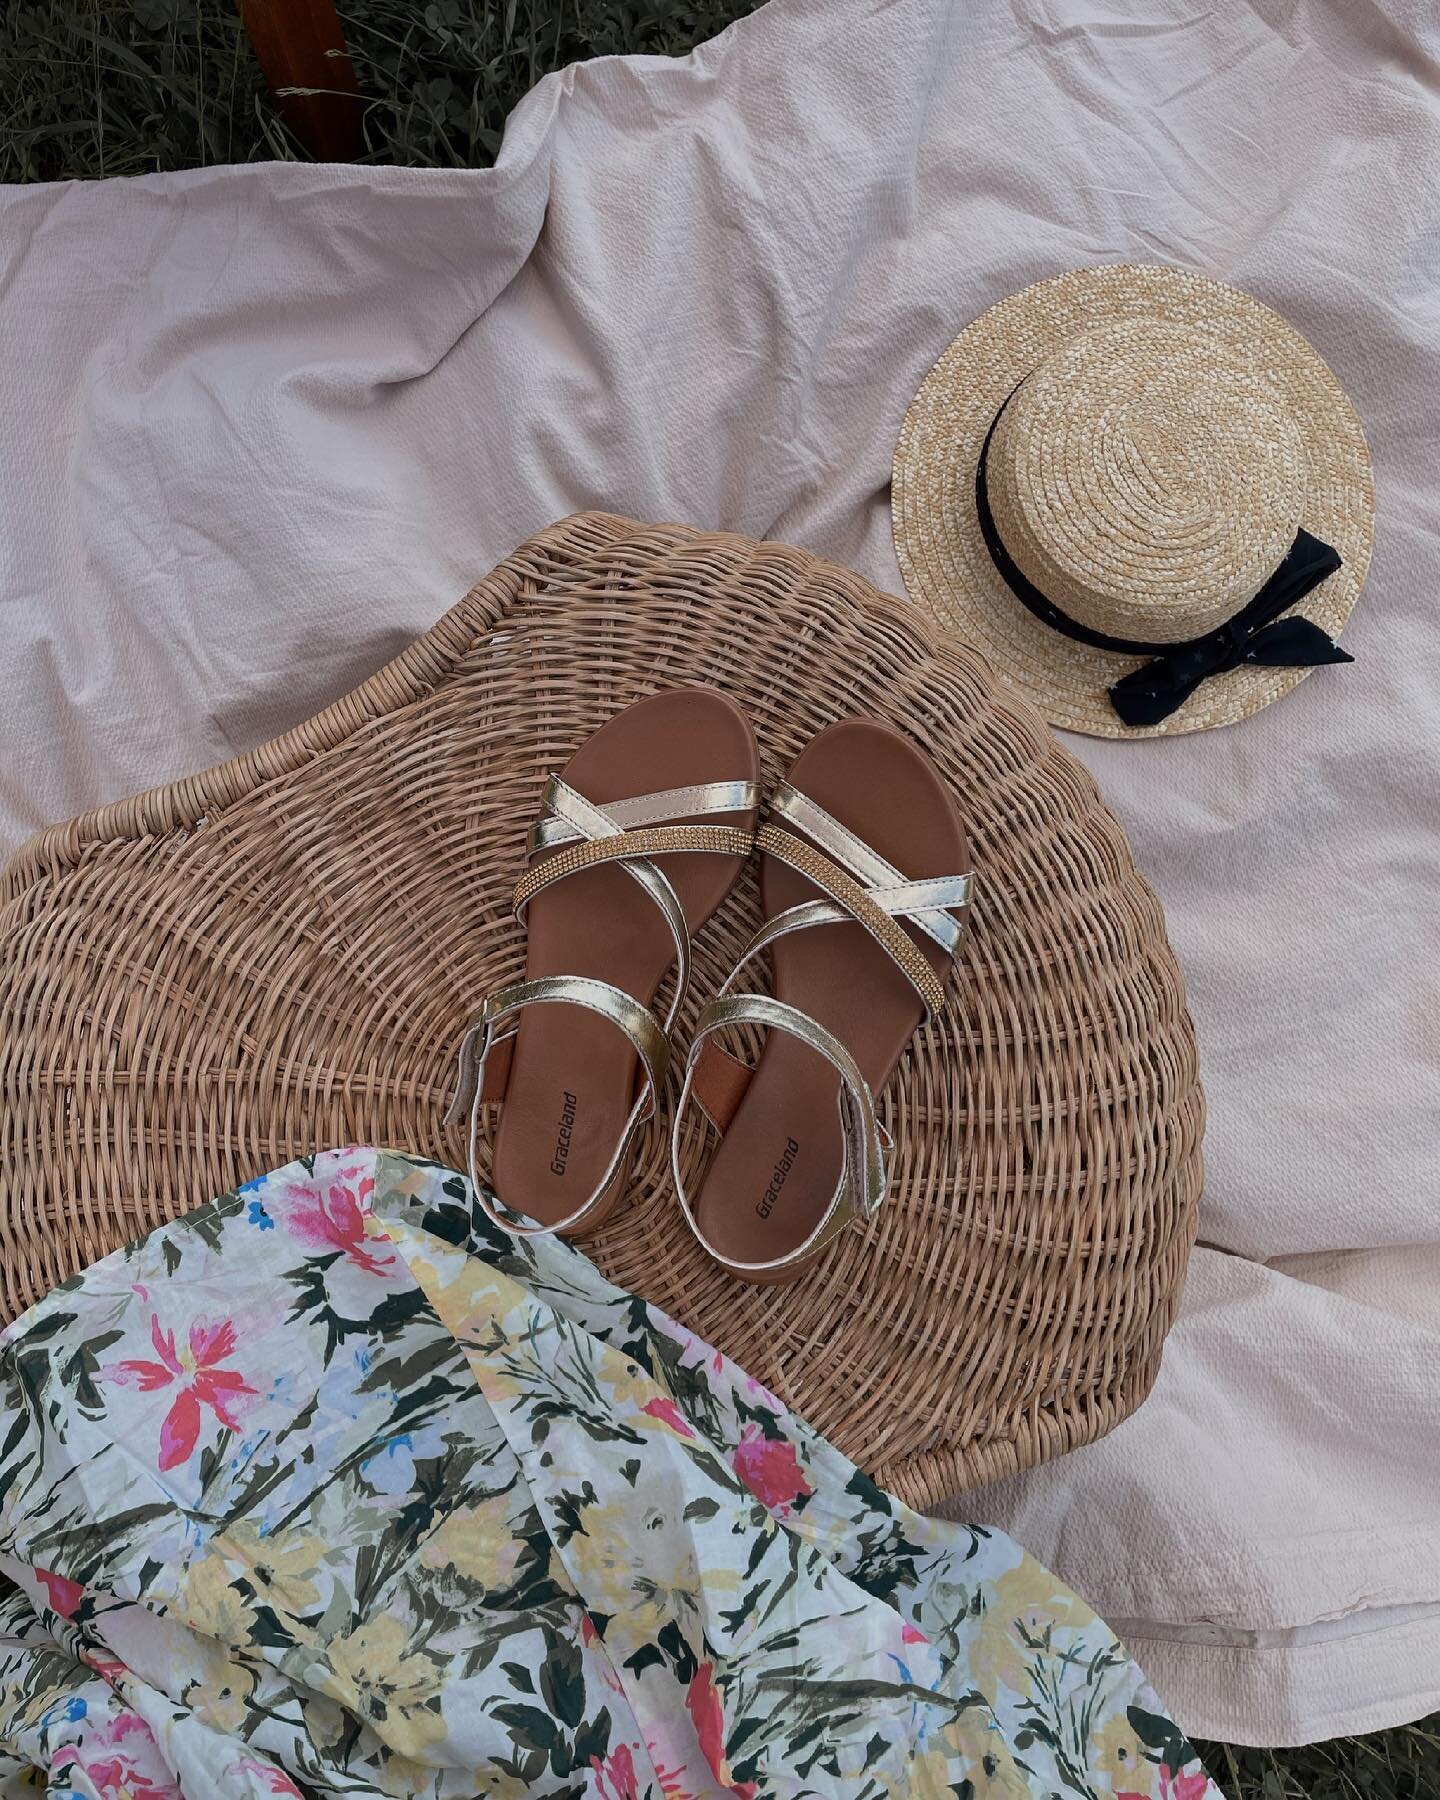 How cute are these summer sandals 🧡 Getting my wear out of these as sun keeps shining and blessing us with warm weather ☀️ #vanharen #vanharenschoenen #summervibes #summersandals #outfit #ootd #discoverunder20 #instafashion #belgium